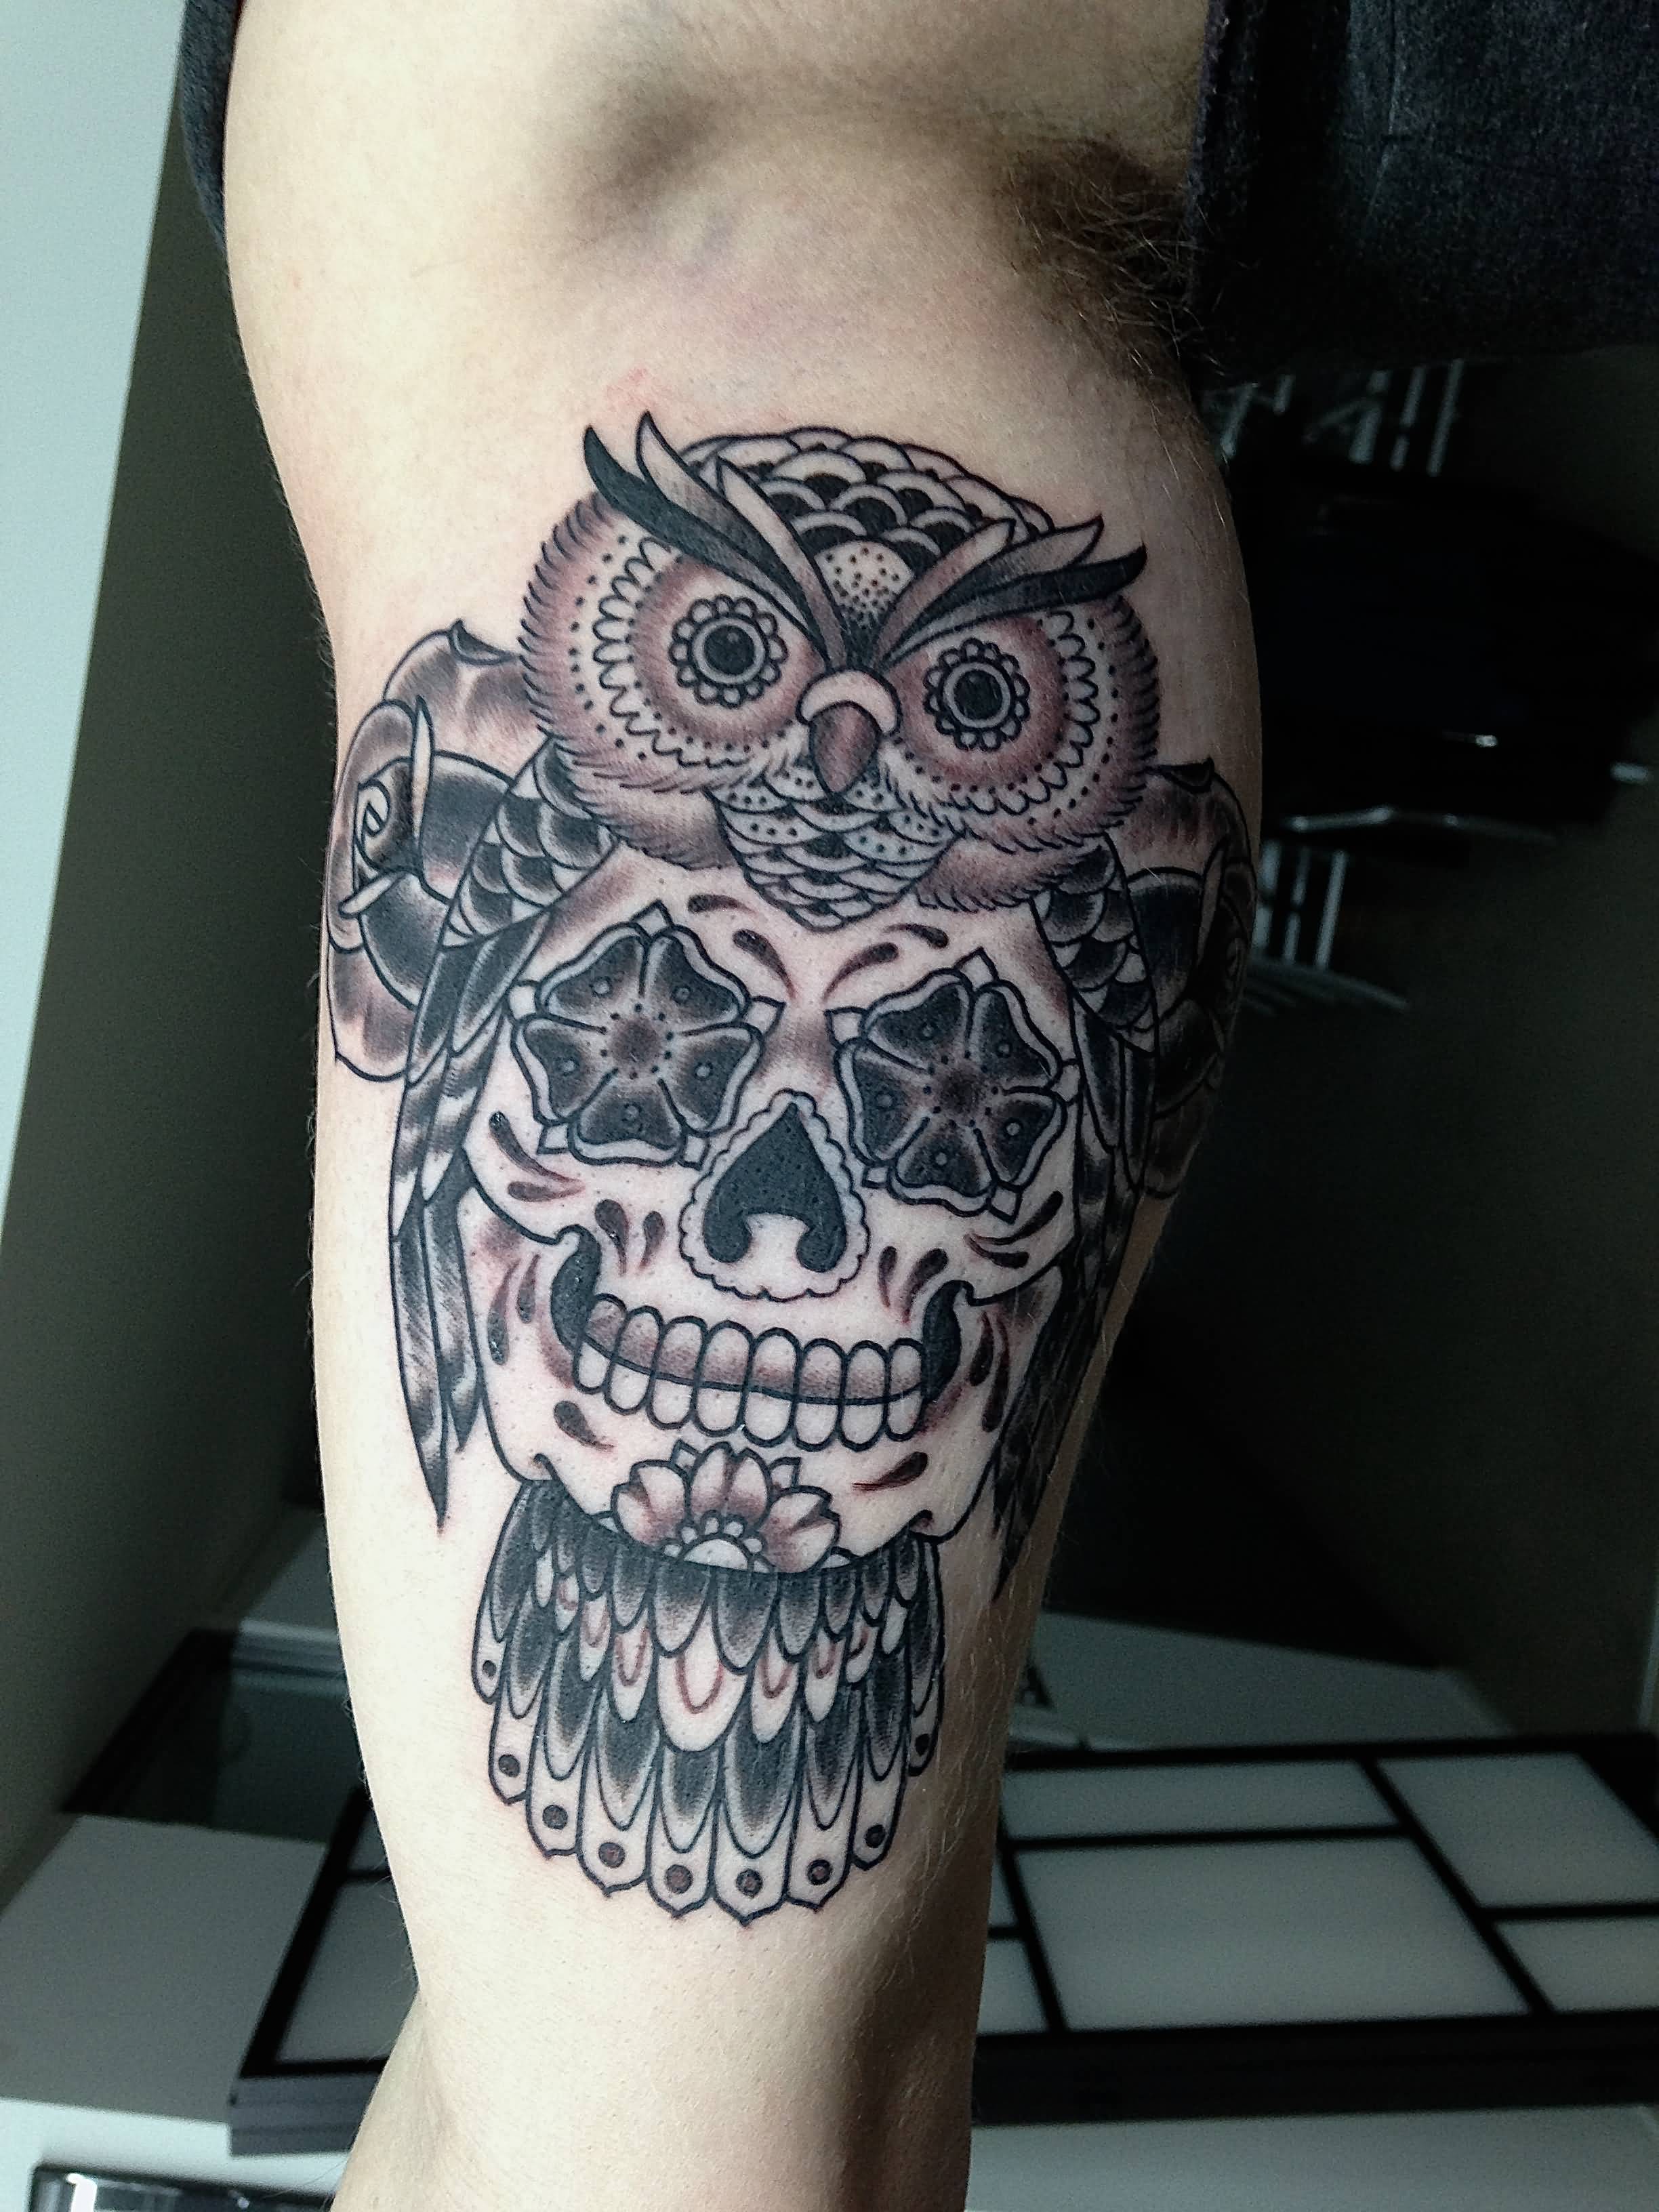 Traditional Black Ink Owl With Sugar Skull And Roses Tattoo Design For Half Sleeve